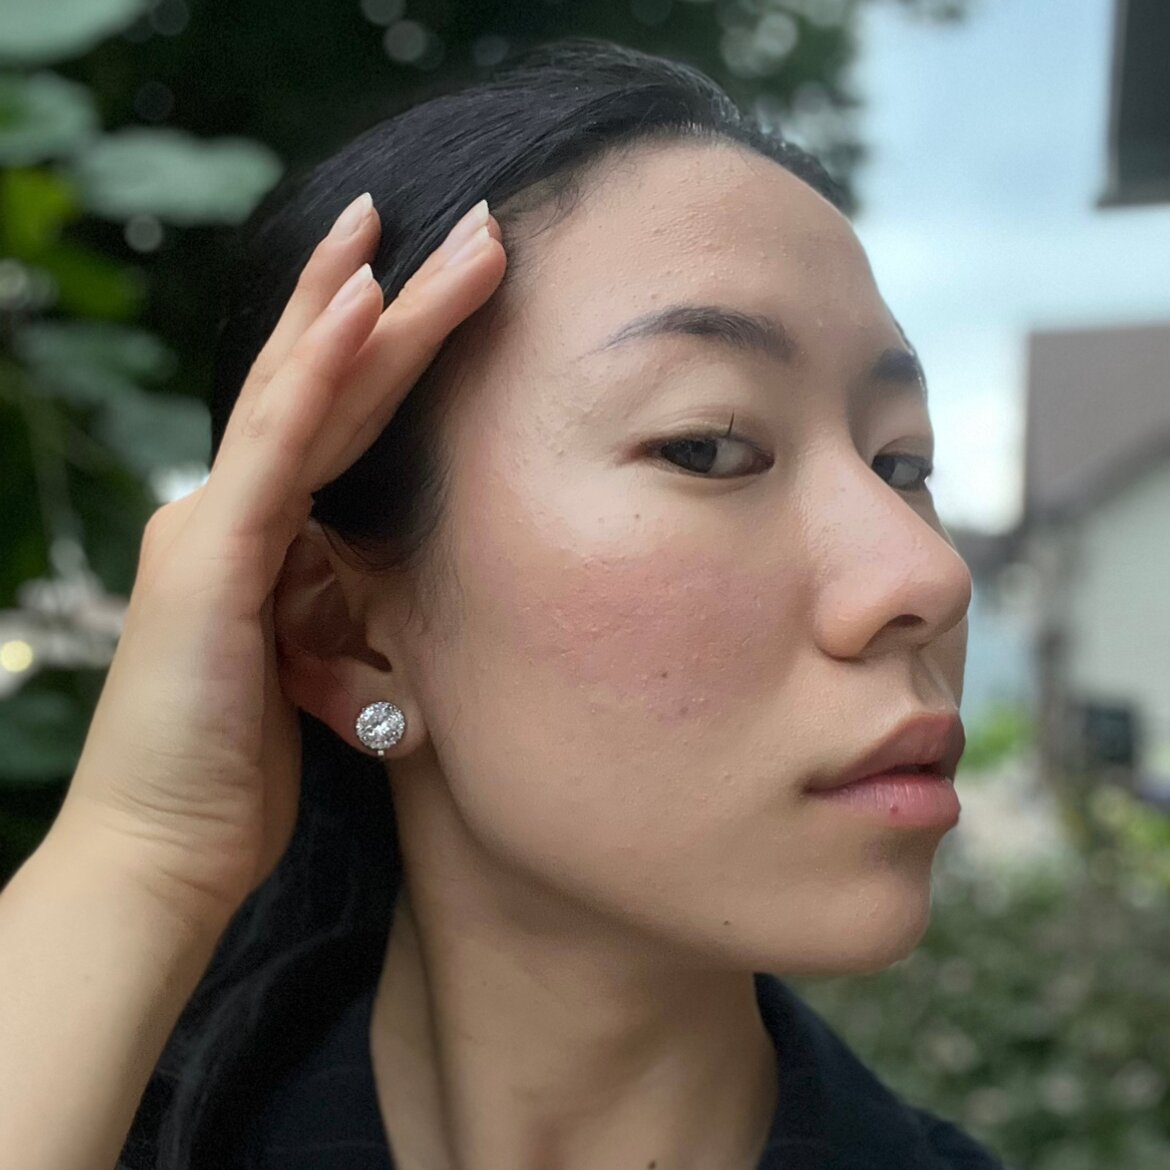 A model wearing the Harper Stud clip-on earrings features a secure hold, with a maximum comfortable wear duration of 8 to 12 hours. It is ideal for all ear types, including thick/large, sensitive, small/thin, and stretched/healing types. It is made with a silver-tone copper alloy and cubic zirconia, and comes with a removable rubber padding for added comfort. Please note: only one pair is included.